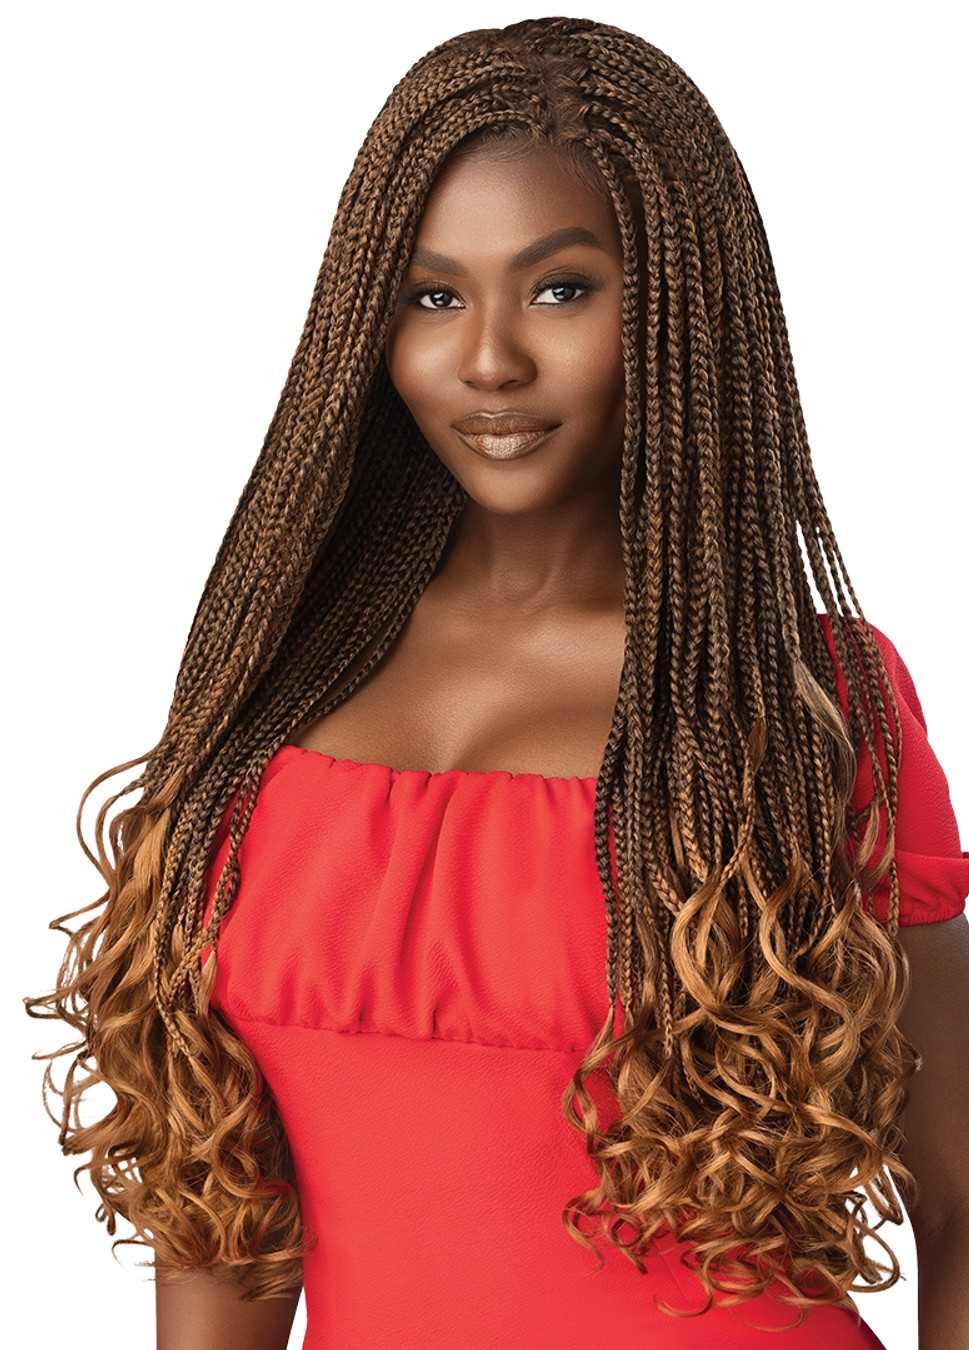 Authentic 3X Value Pack French Curl Braid 22 – Find Your New Look Today!